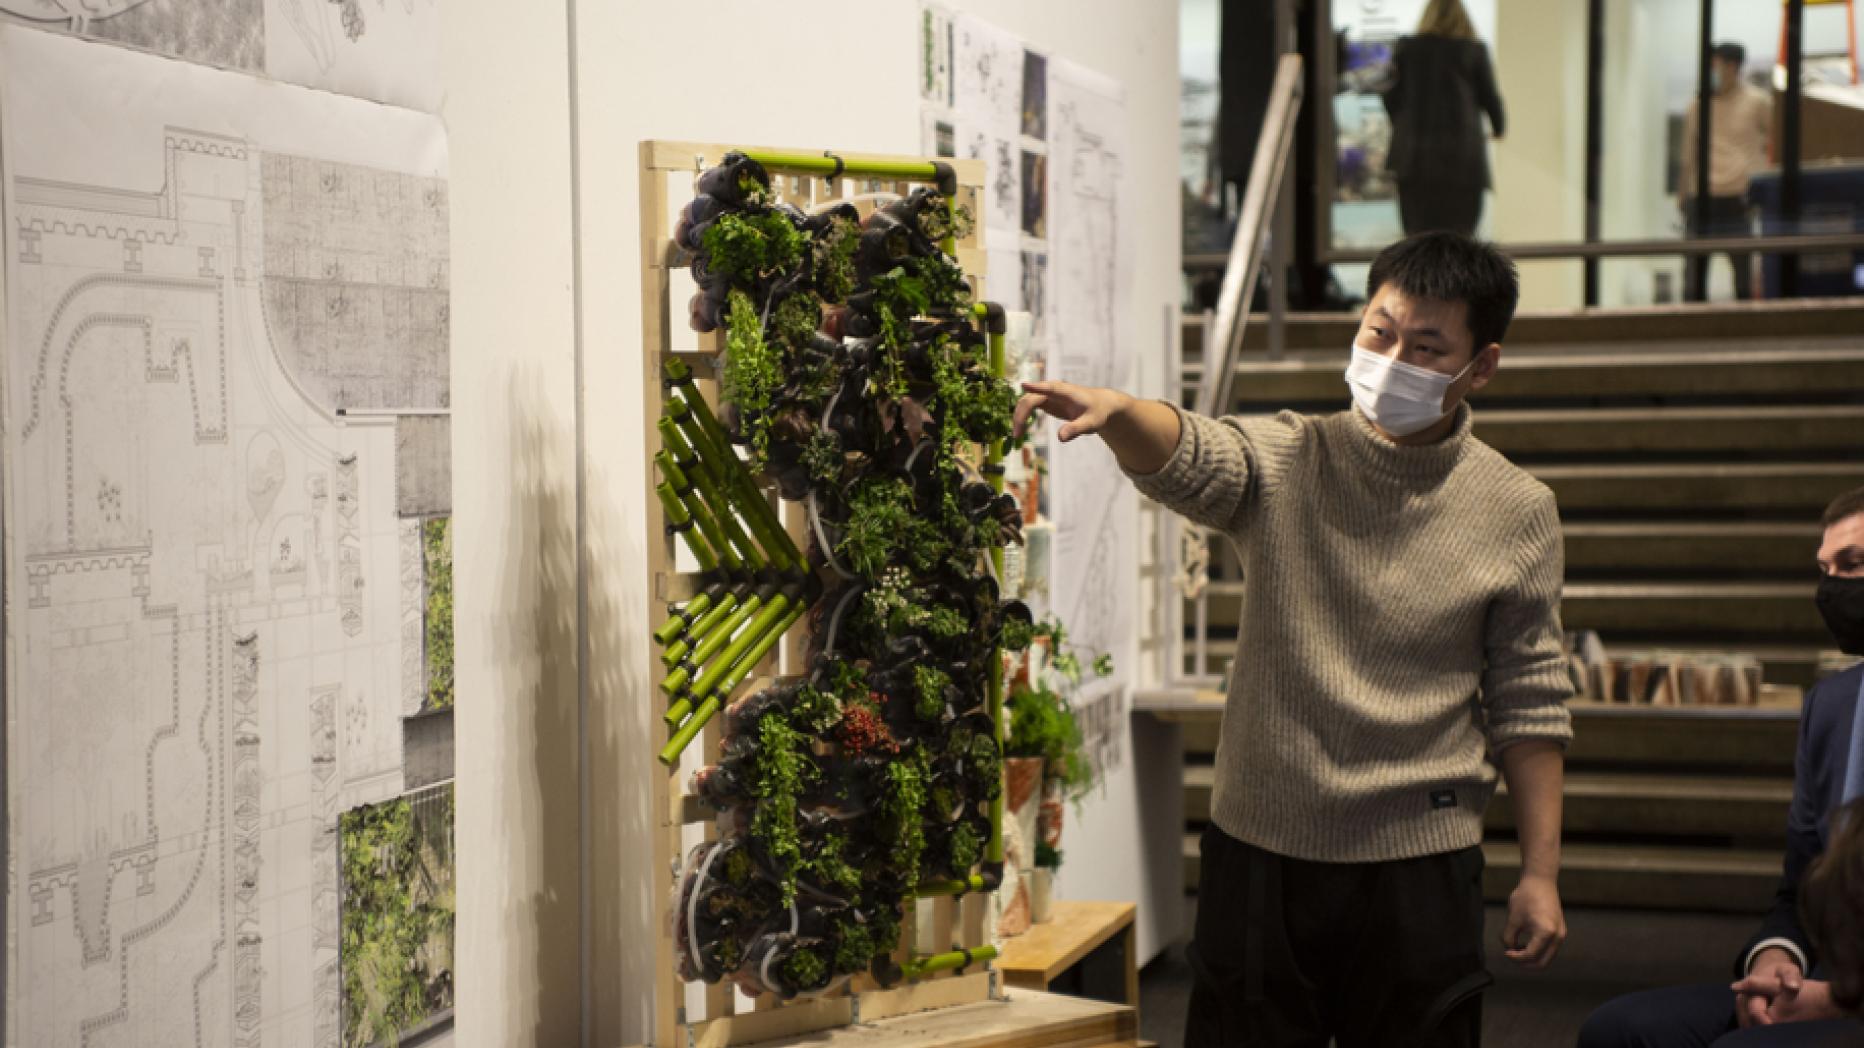 A young man gestures toward a drawing on the wall next to framed plant array